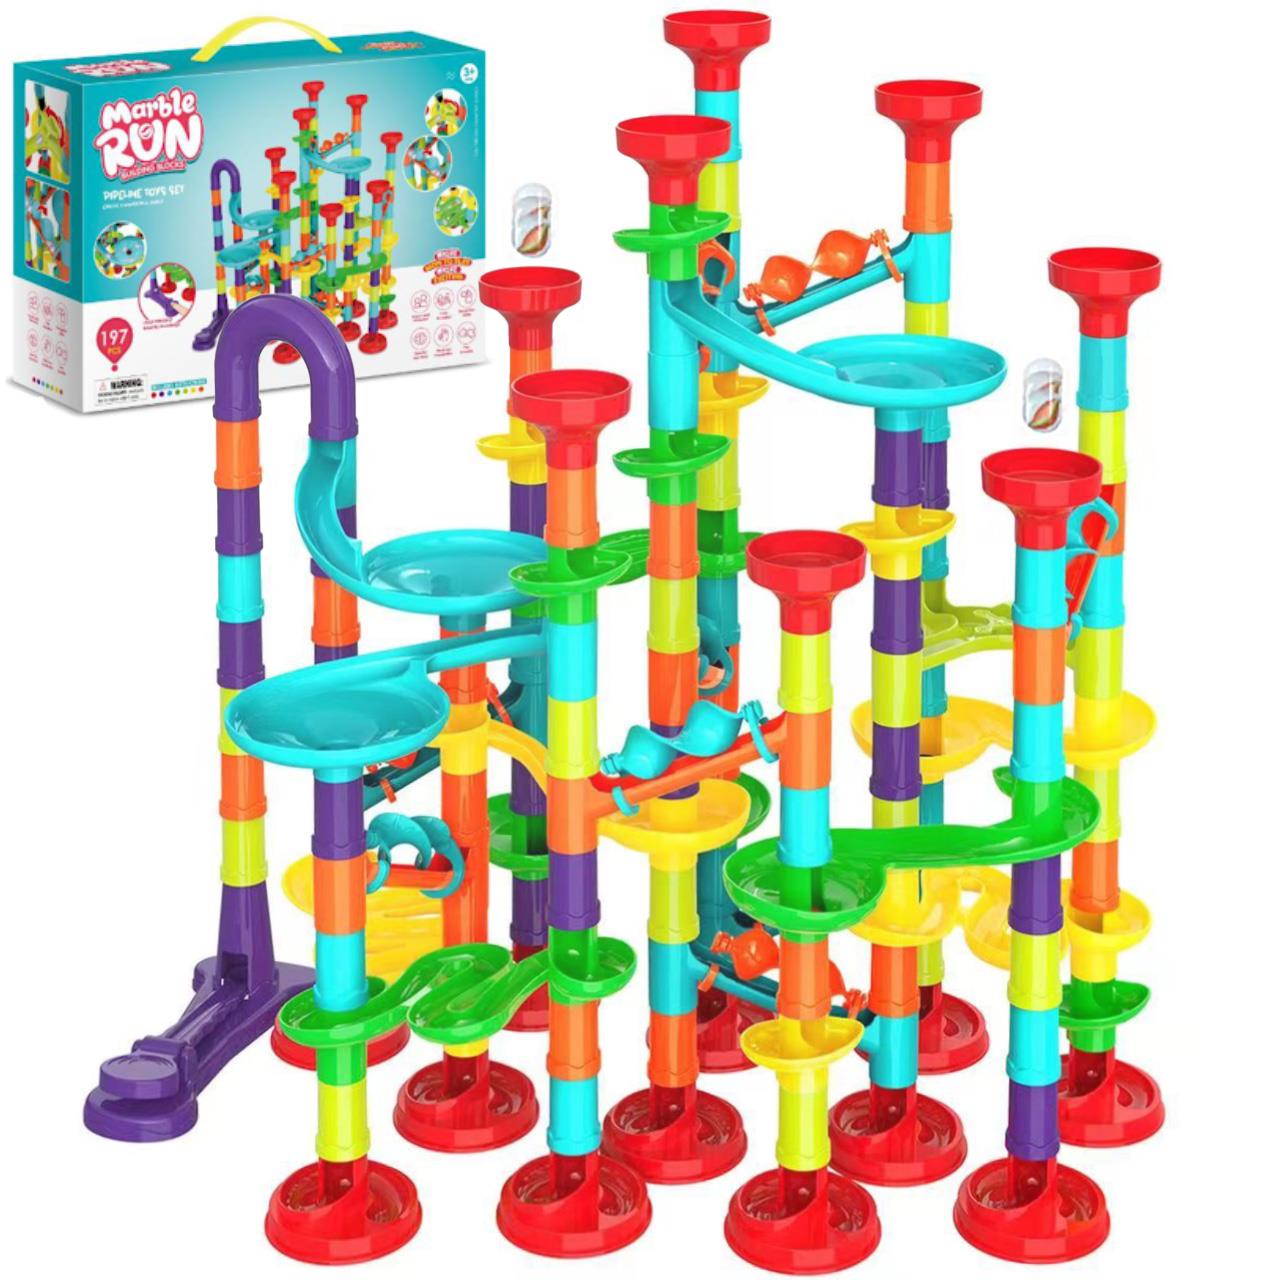 The Magic Toy Shop 197 Pieces Marble Run Game